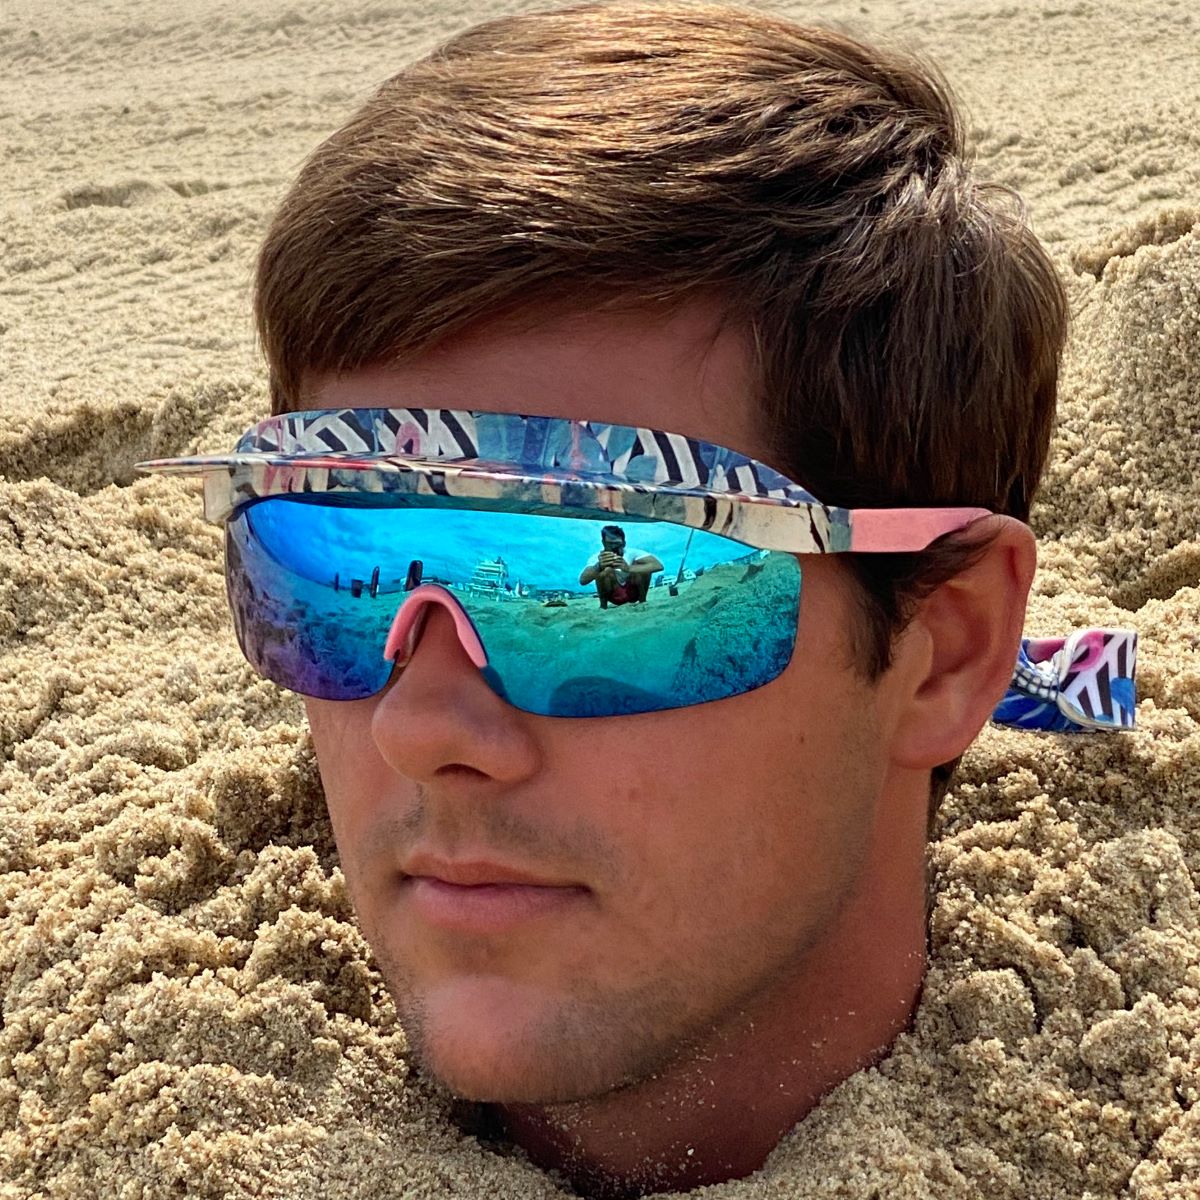 All of our shades are polarized and UV 400 so you can punch the sun!